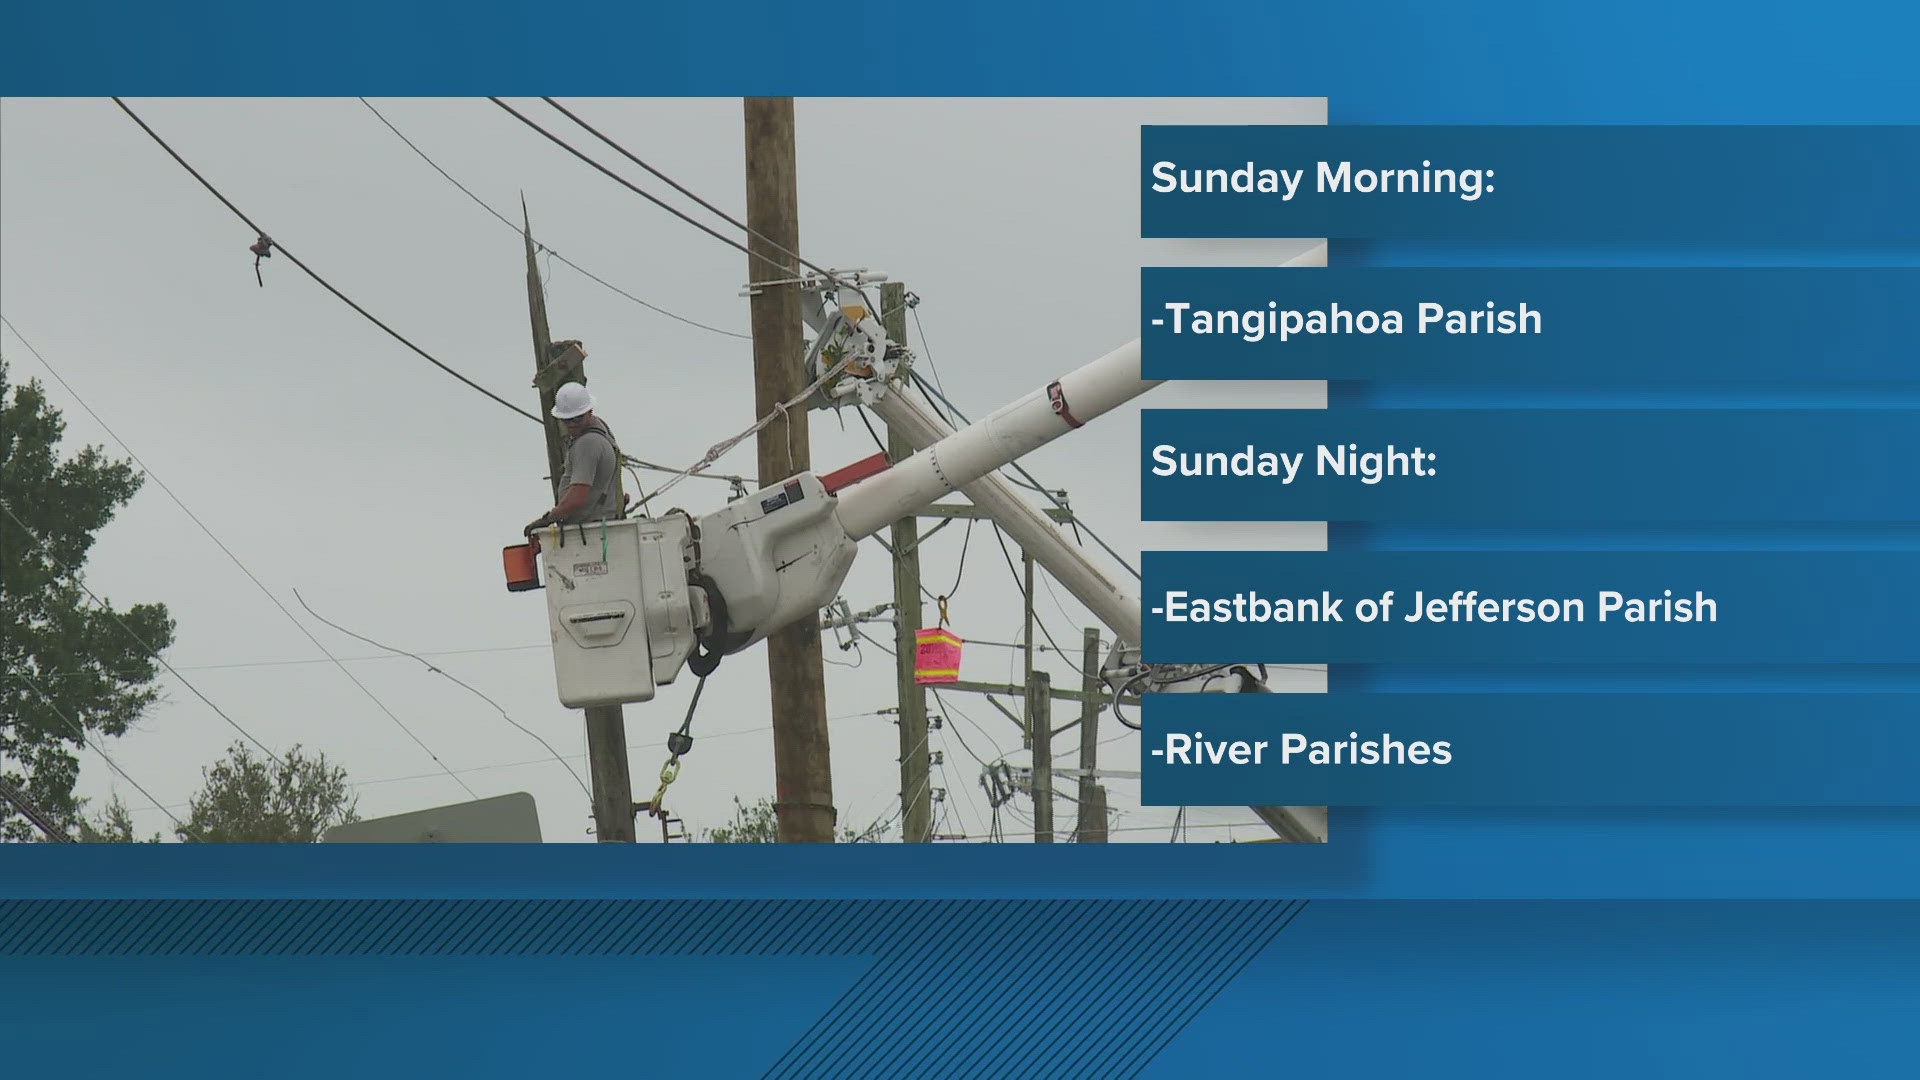 ​Entergy said crews will be out Saturday trimming trees, setting new poles and installing new transformers, crossarms and other electric equipment.